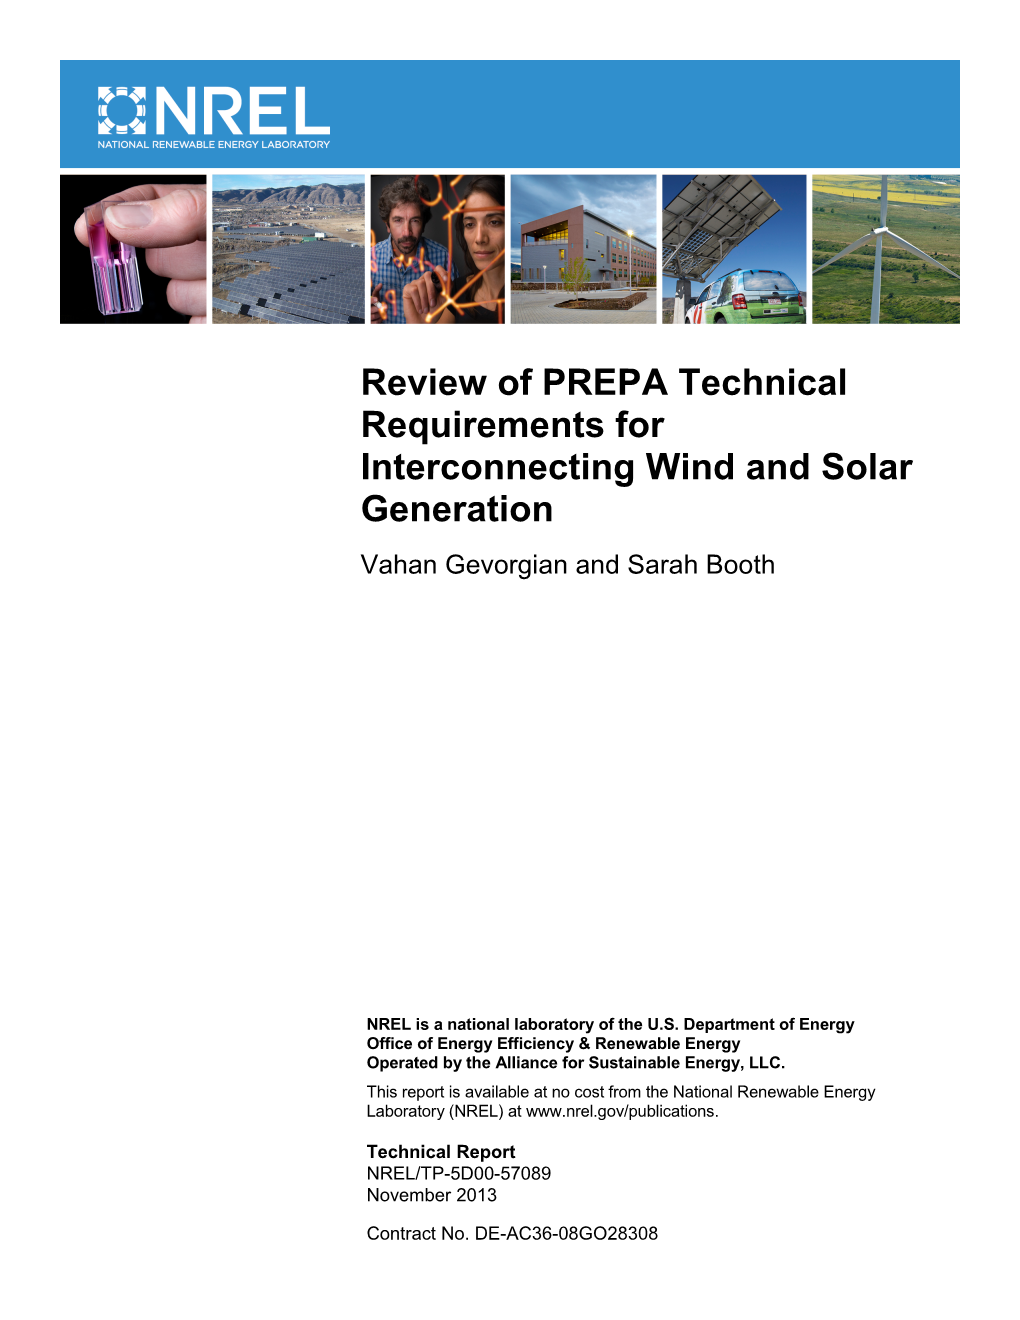 Review of PREPA Technical Requirements for Interconnecting Wind and Solar Generation Vahan Gevorgian and Sarah Booth